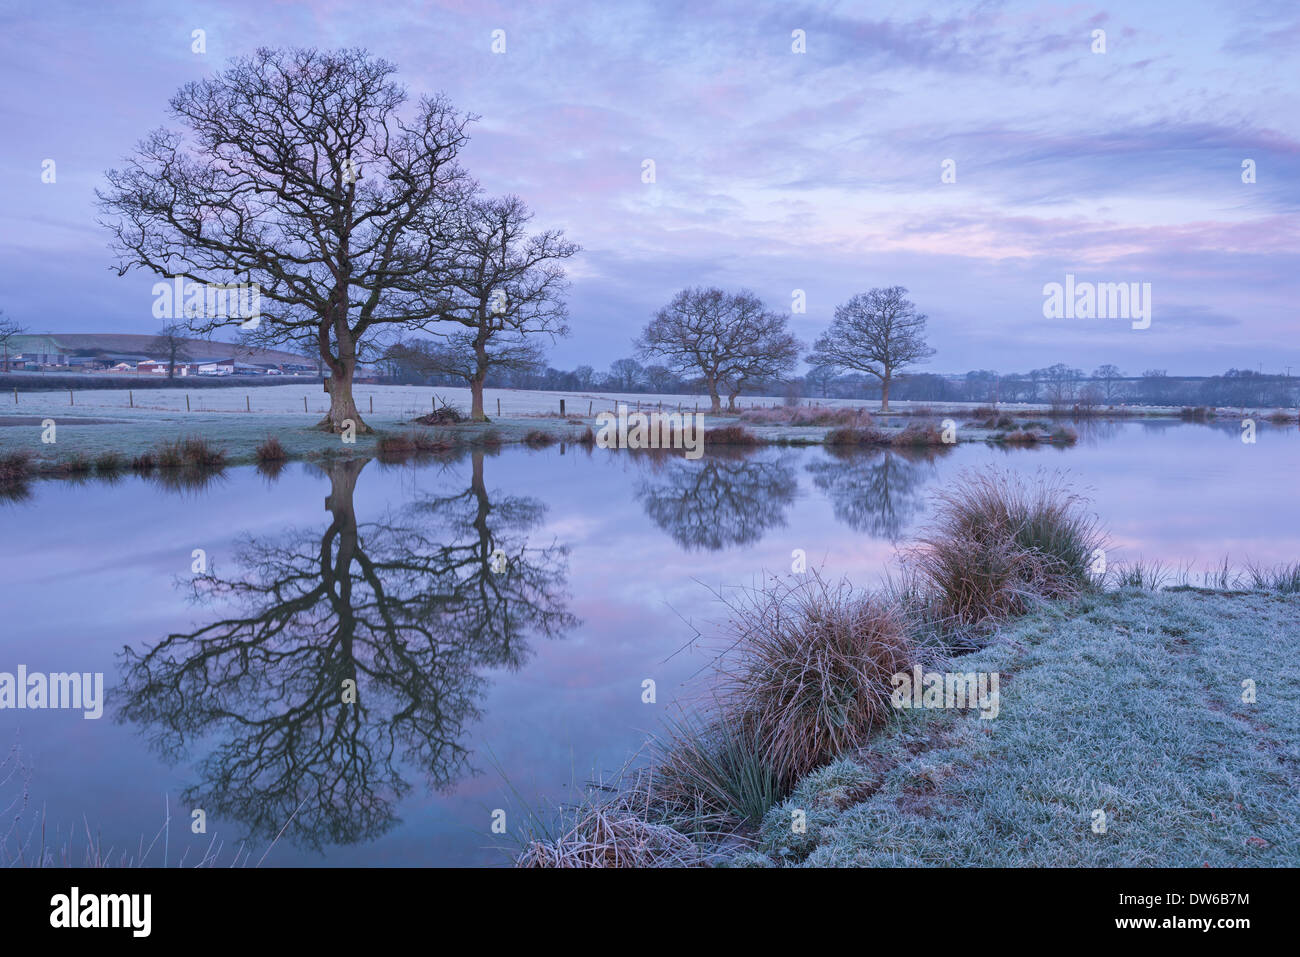 Frosty winter morning beside a rural pond, Morchard Road, Devon, England. Winter (January) 2014. Stock Photo